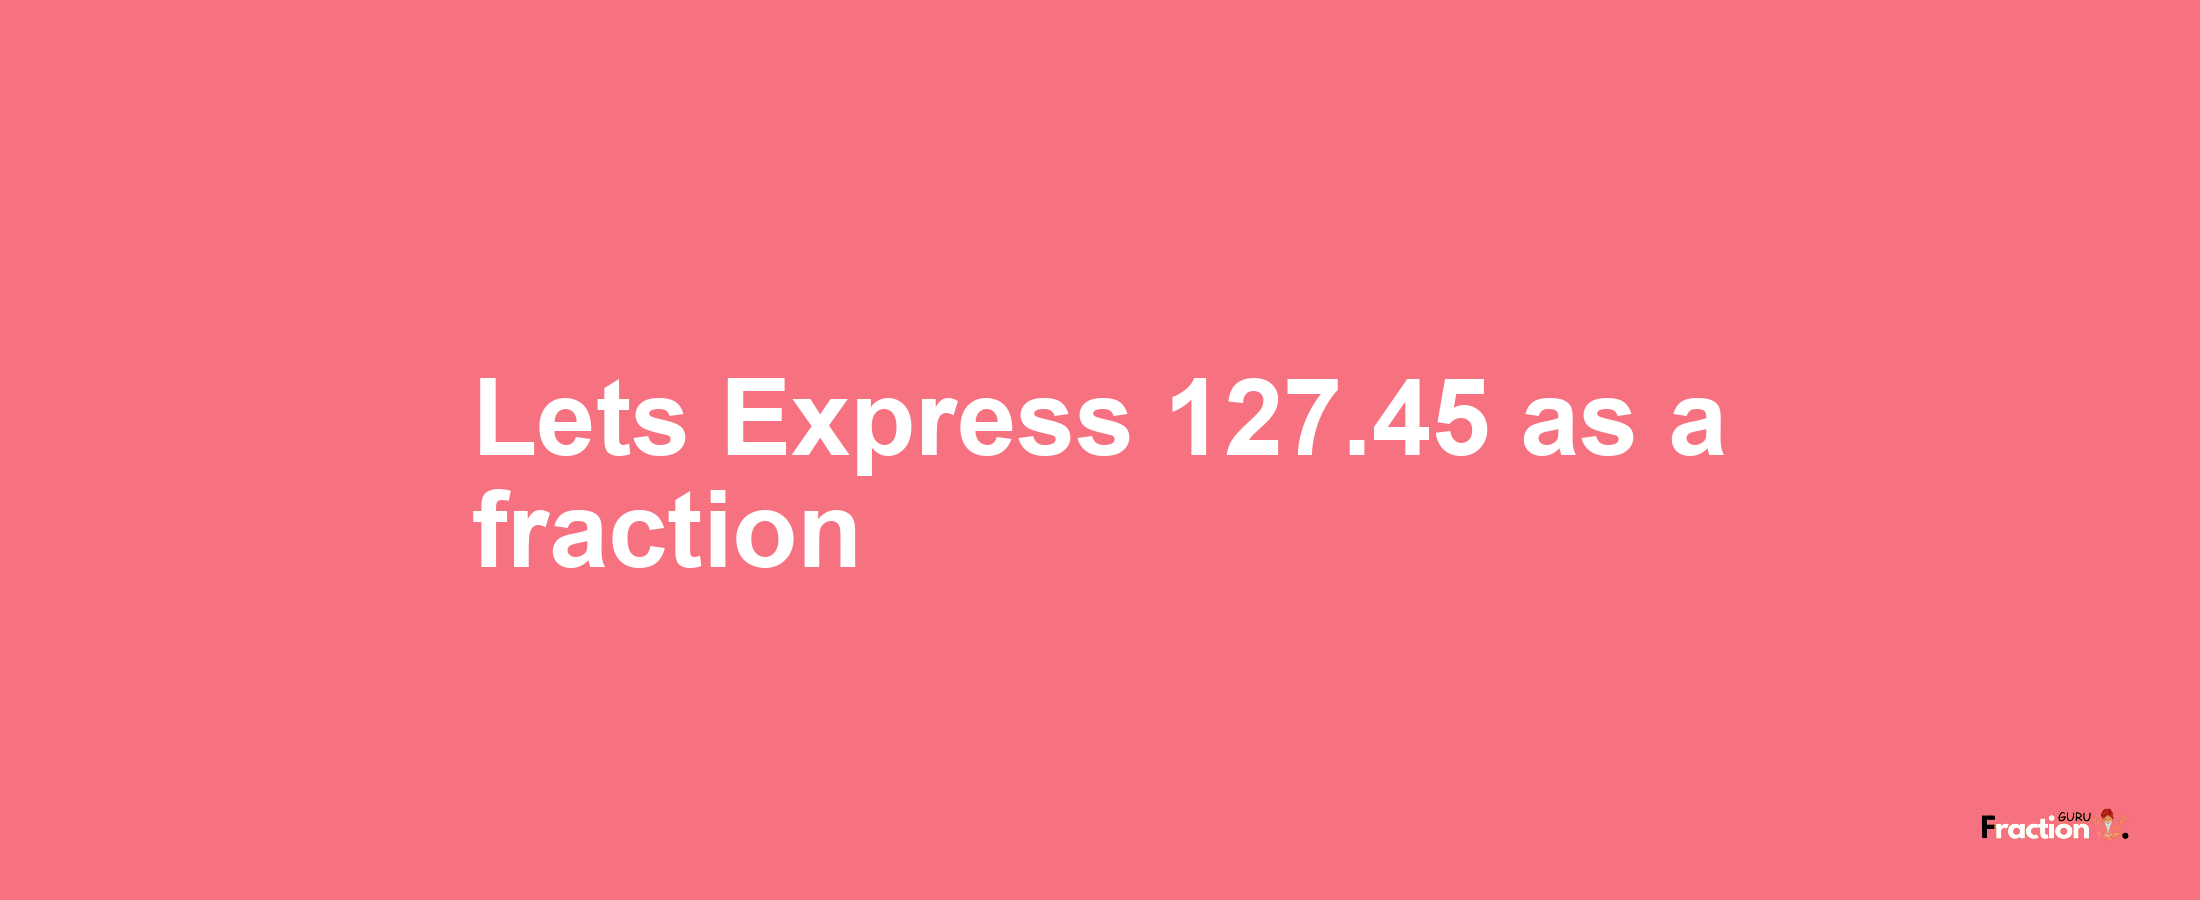 Lets Express 127.45 as afraction